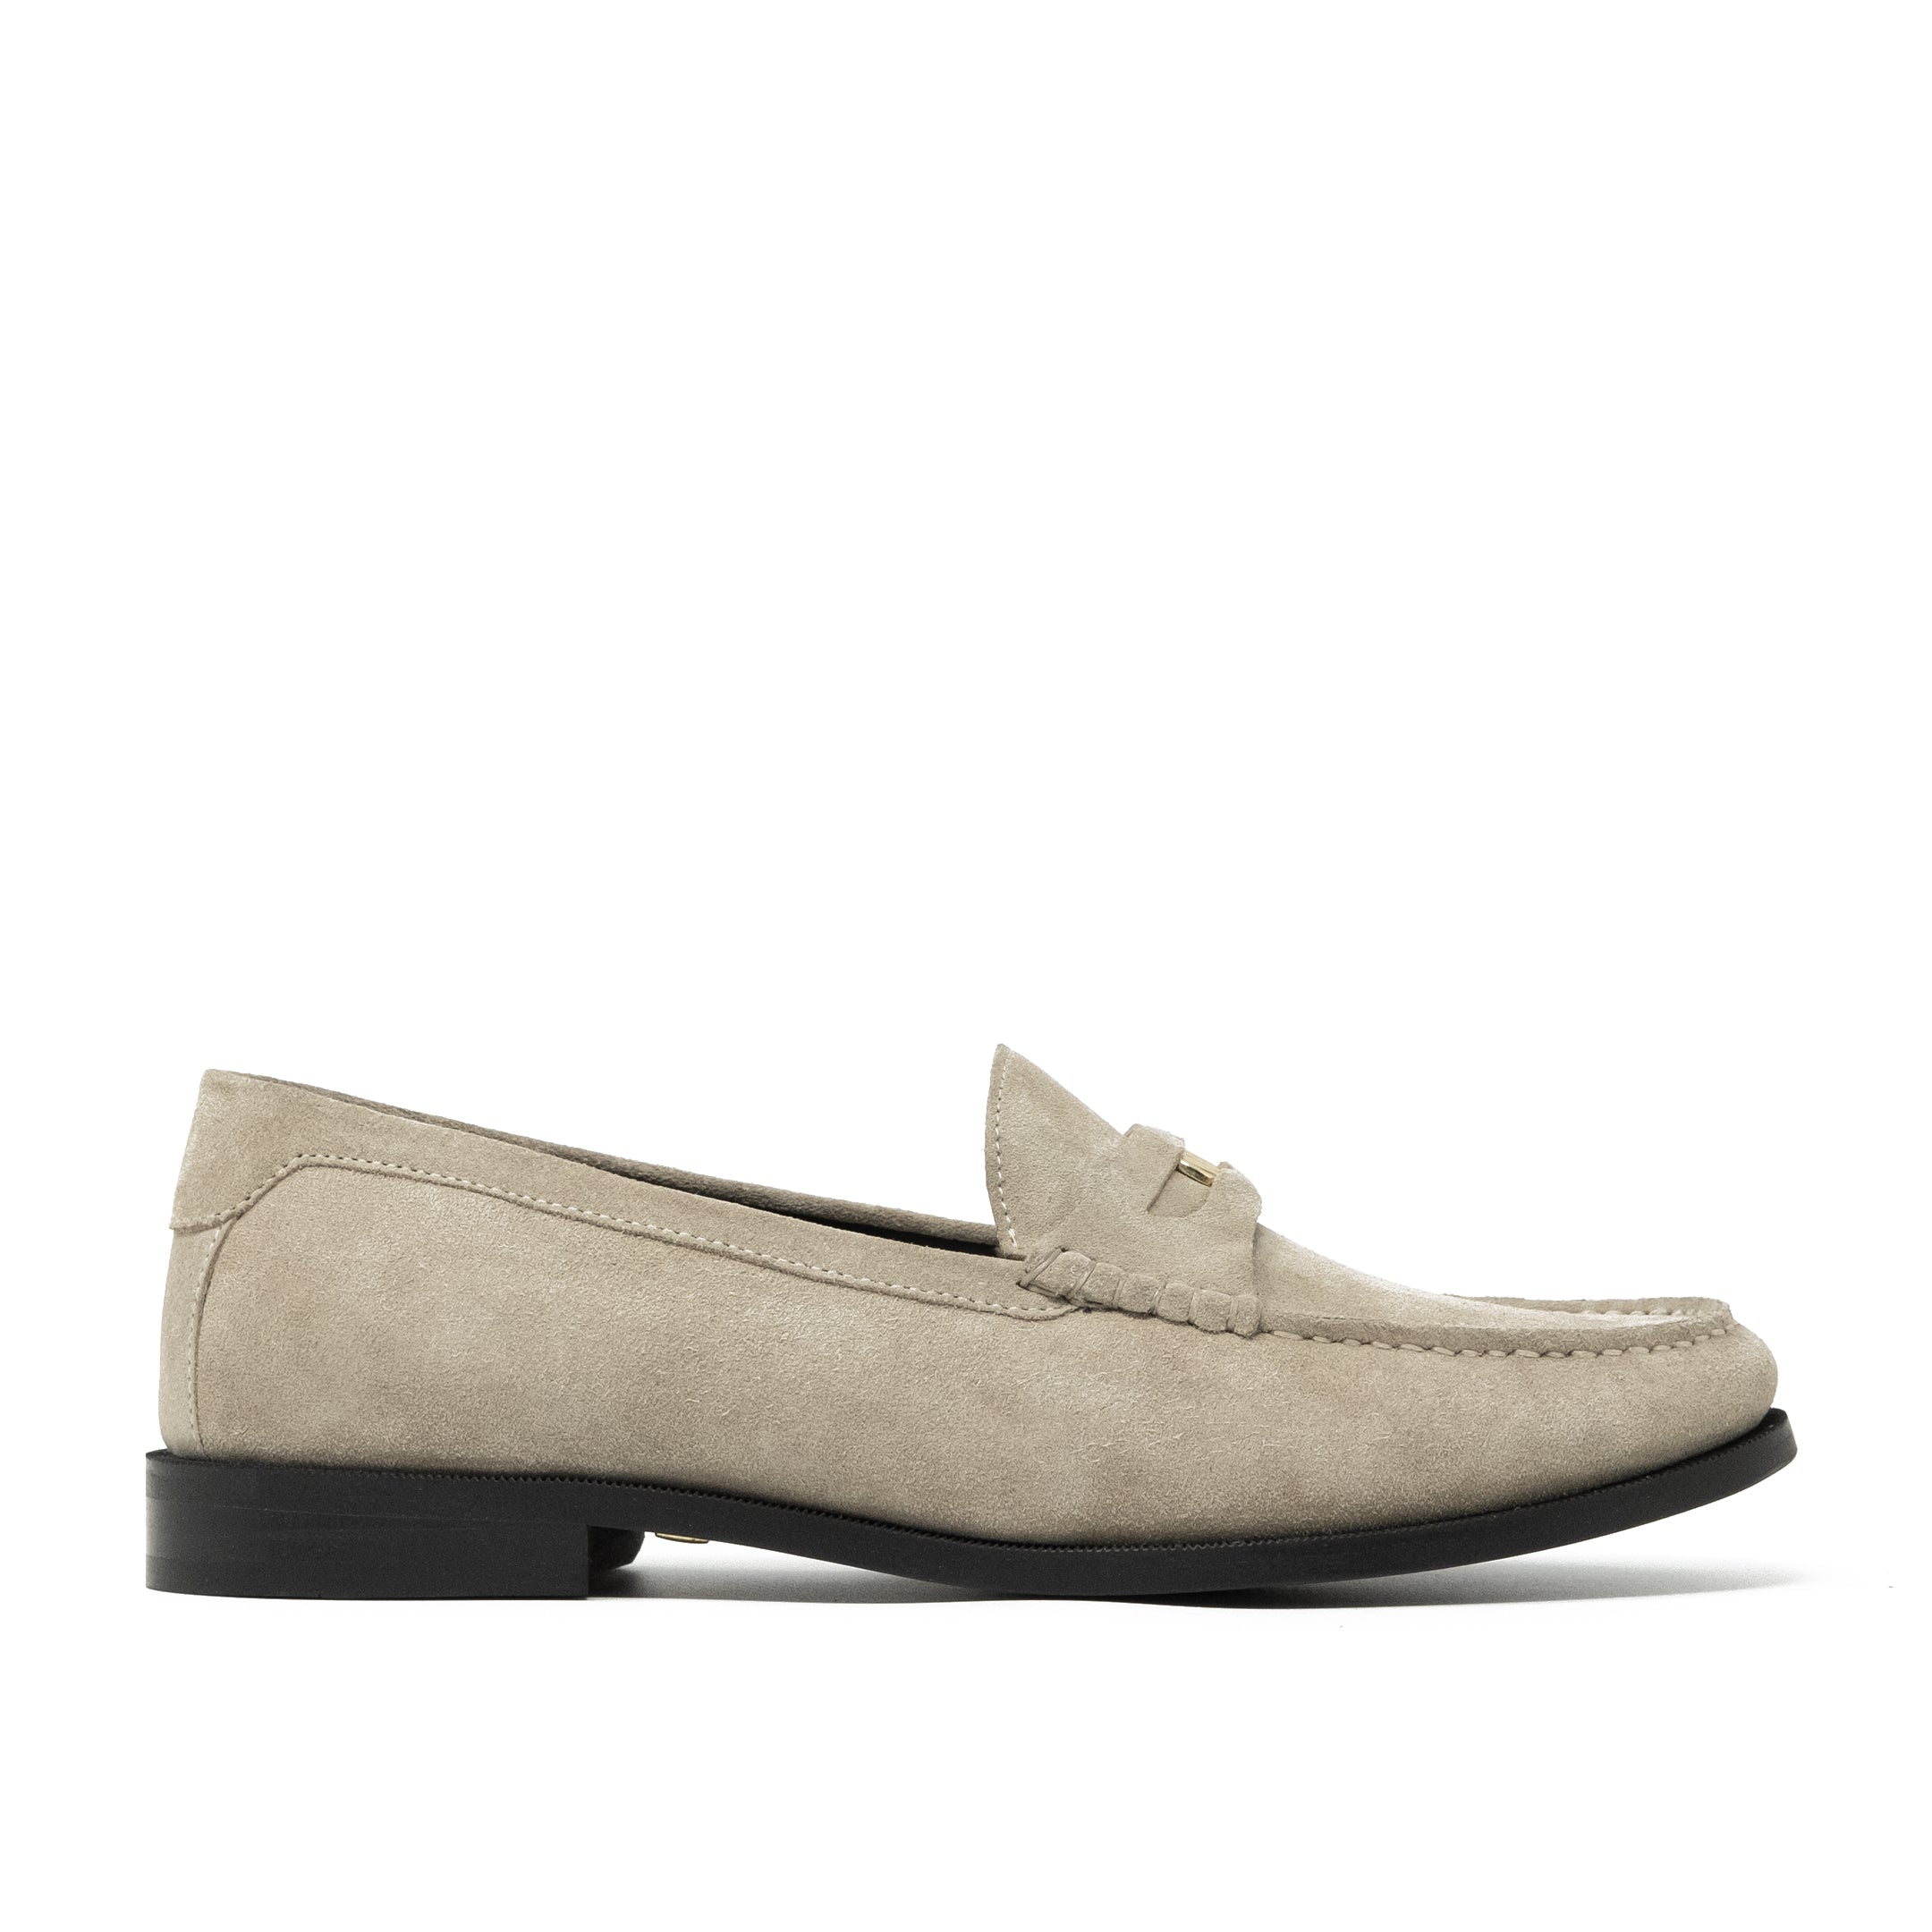 Walk London Riva Penny Loafer in Stone Suede